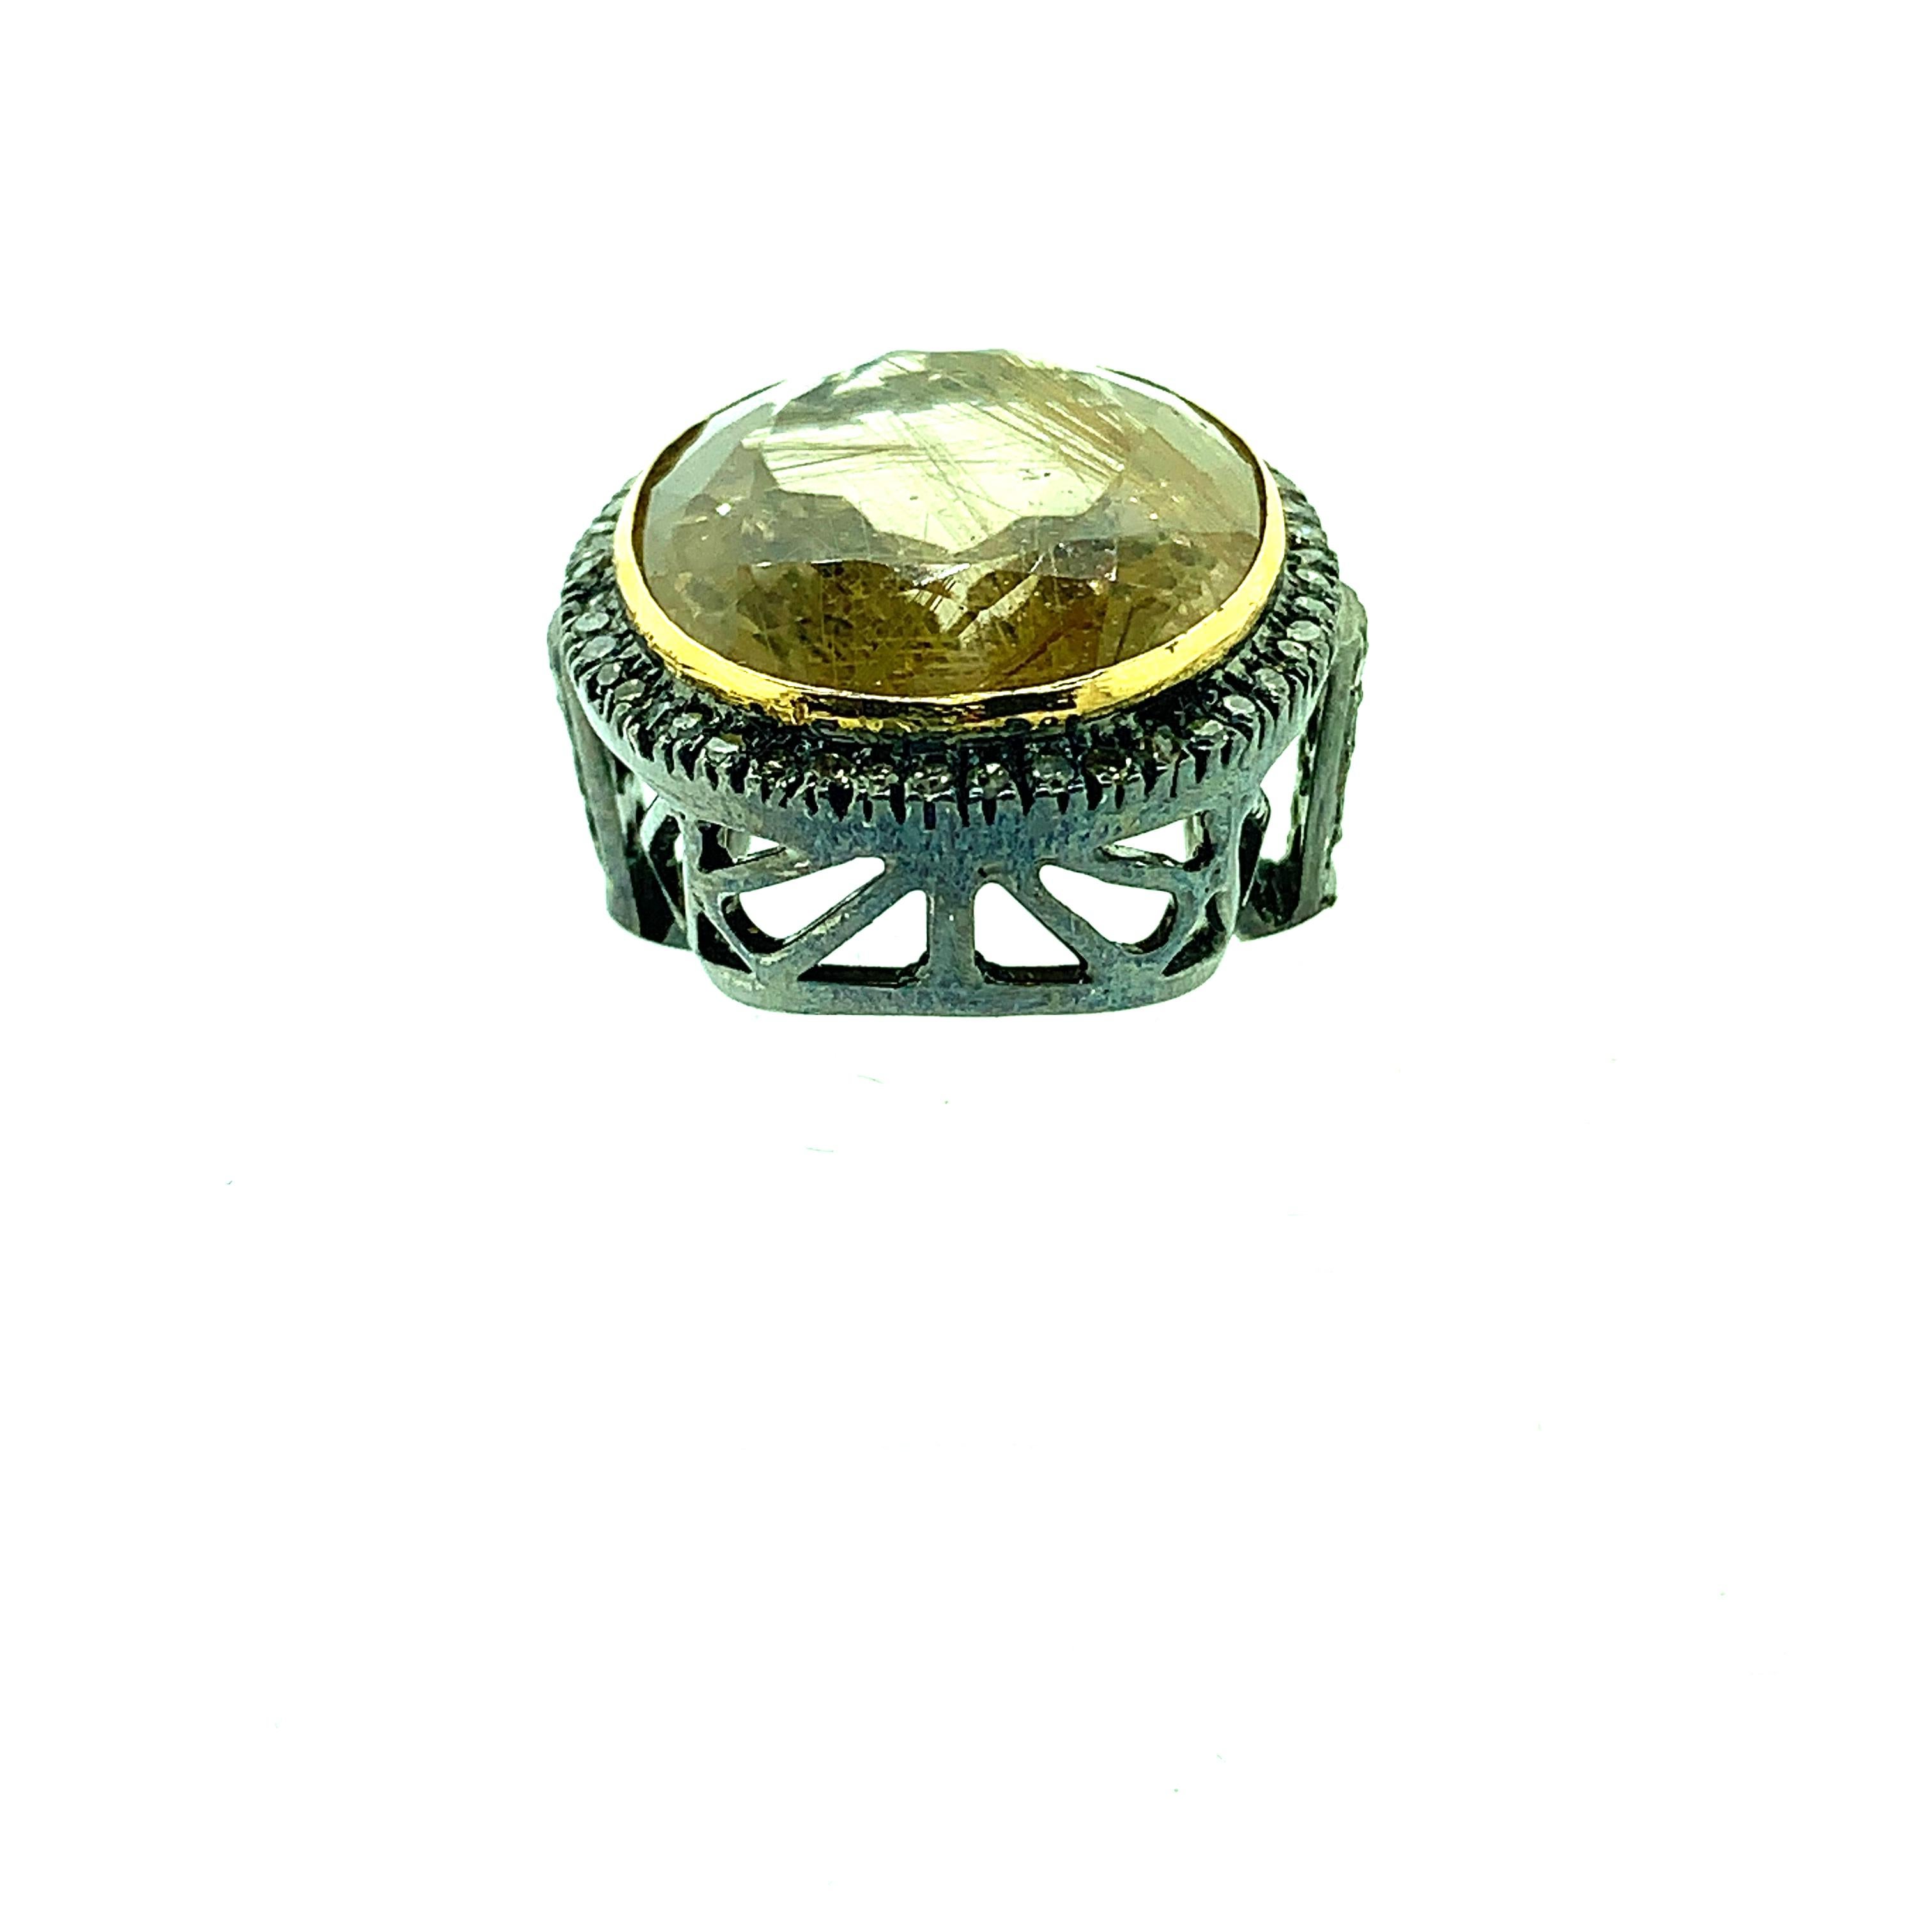 The gemstone is 100% natural with golden needles. A rare find! this ring is made with oxidize silver and 14K gold which complements the golden needles perfectly. Rutilated quartz is sorrouned by chapagne diamonds gives luxurious look. This is one of